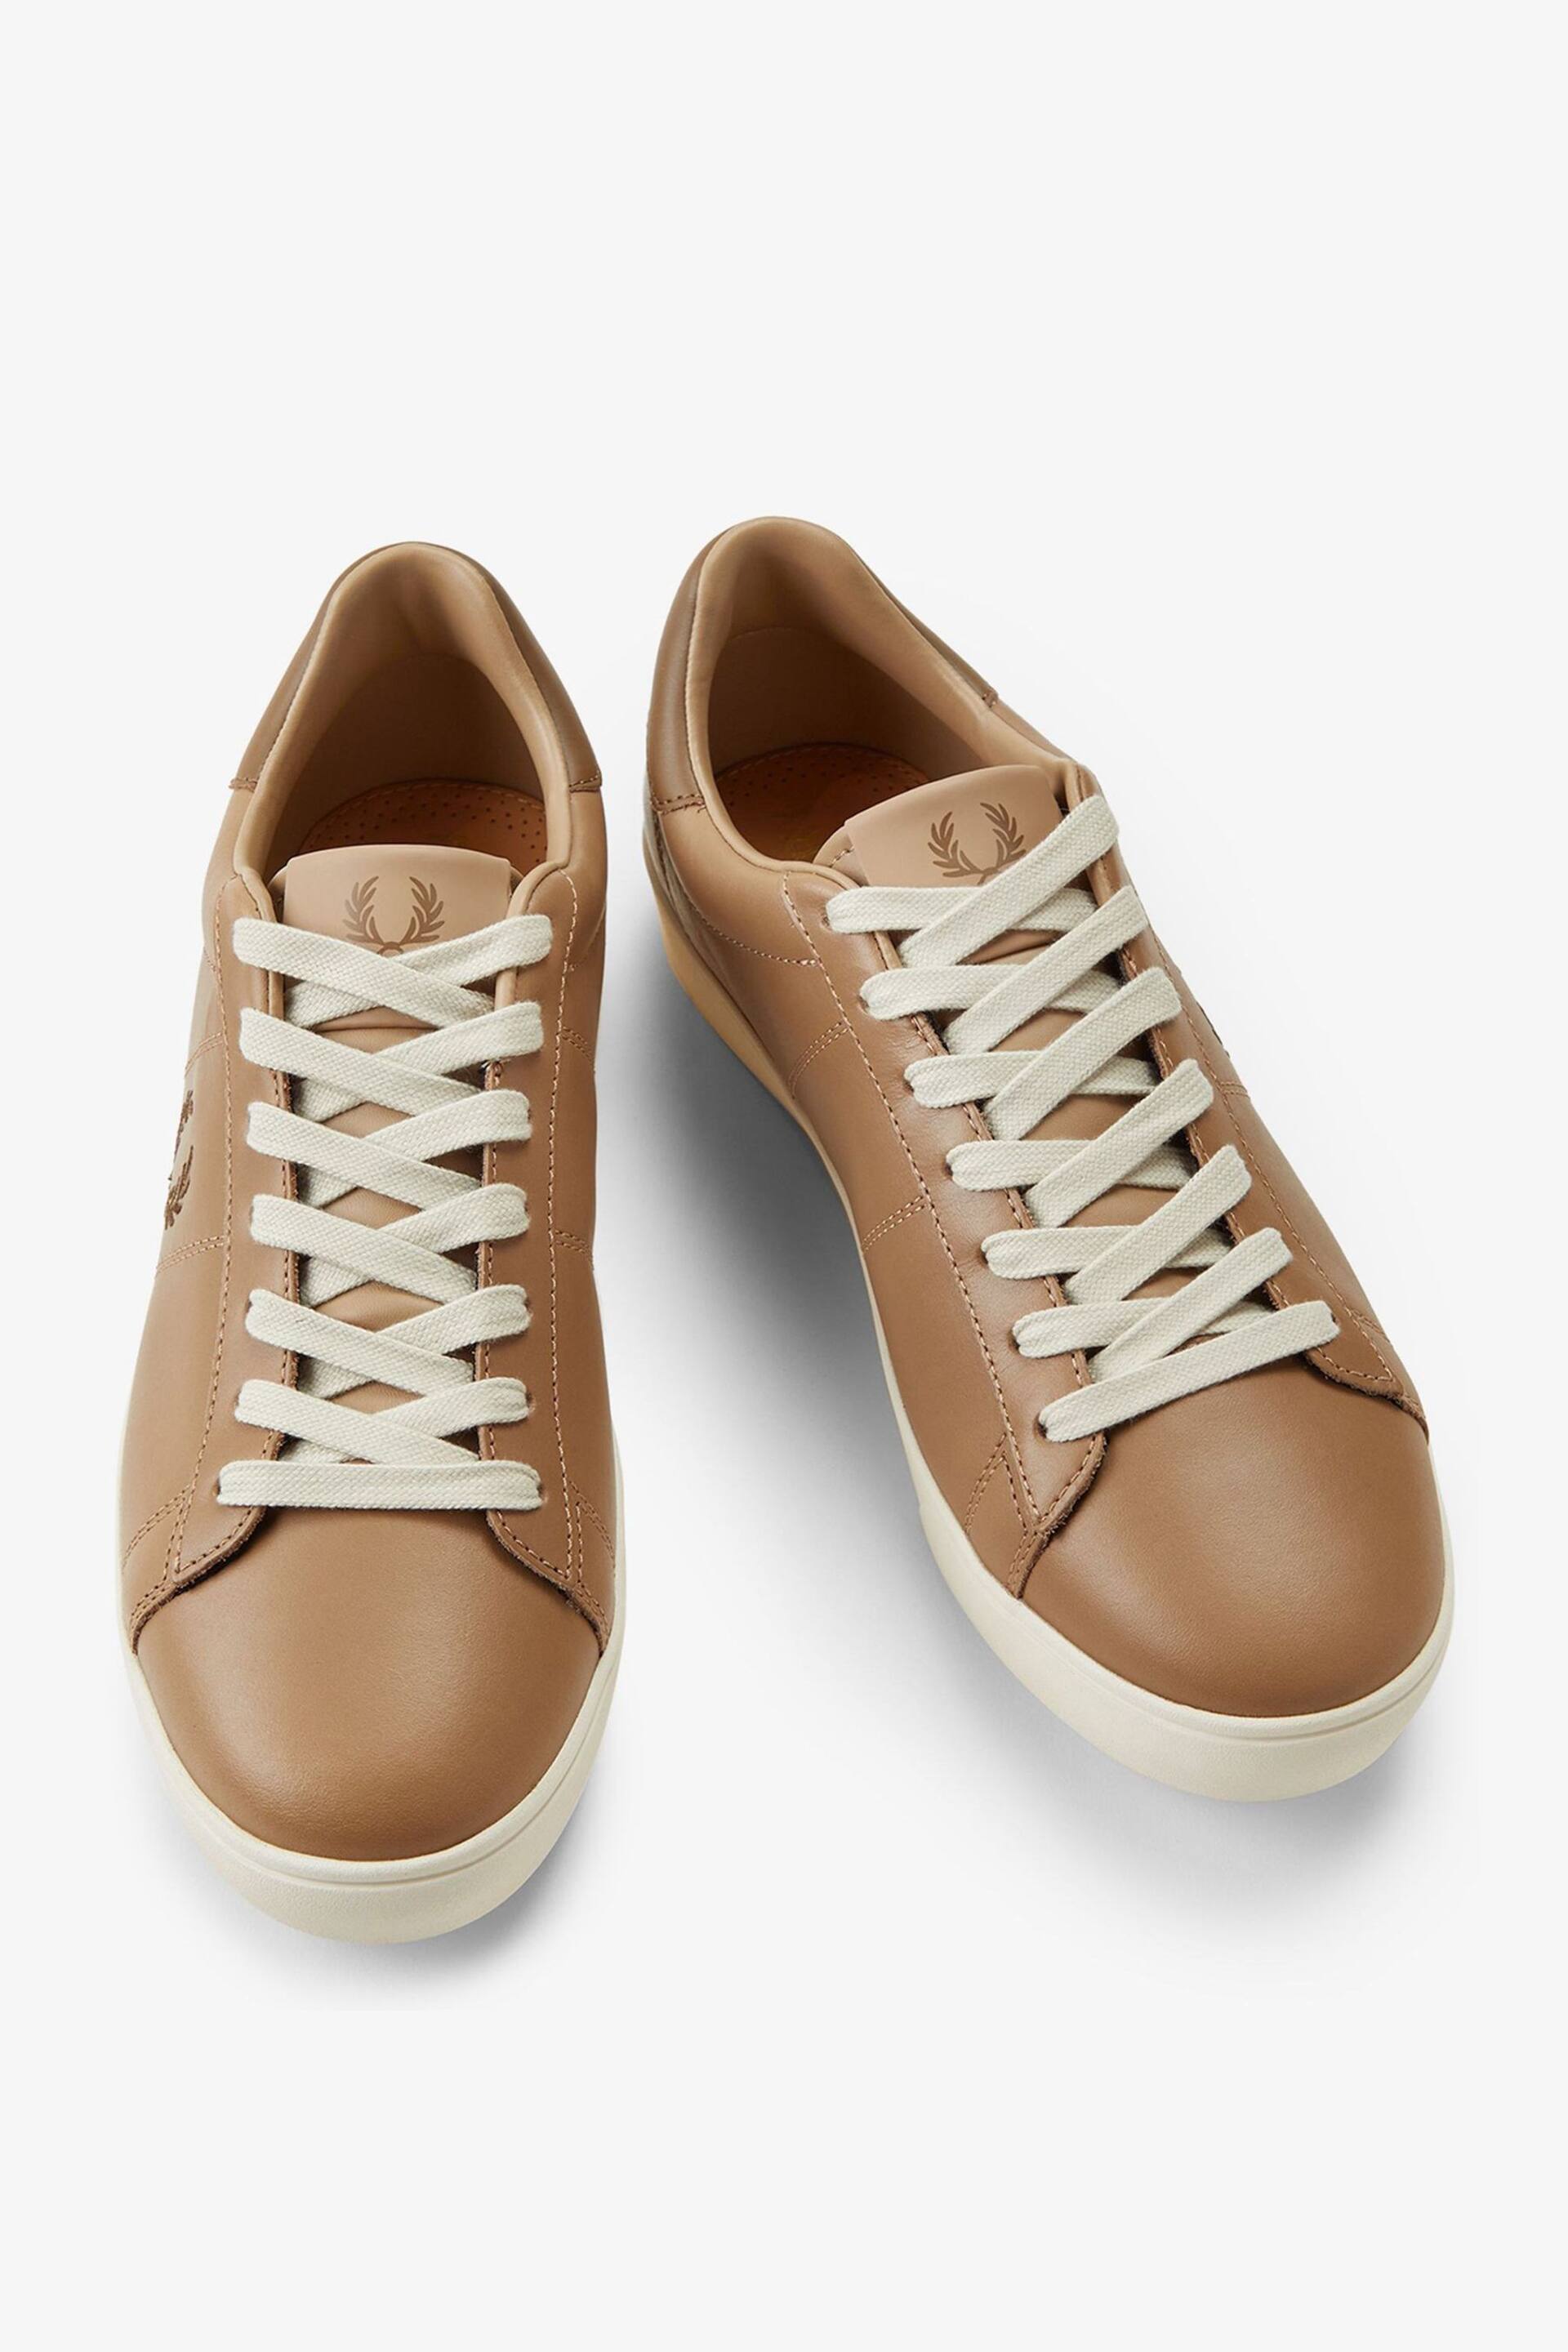 Fred Perry Spencer Leather Brown Trainers - Image 2 of 4